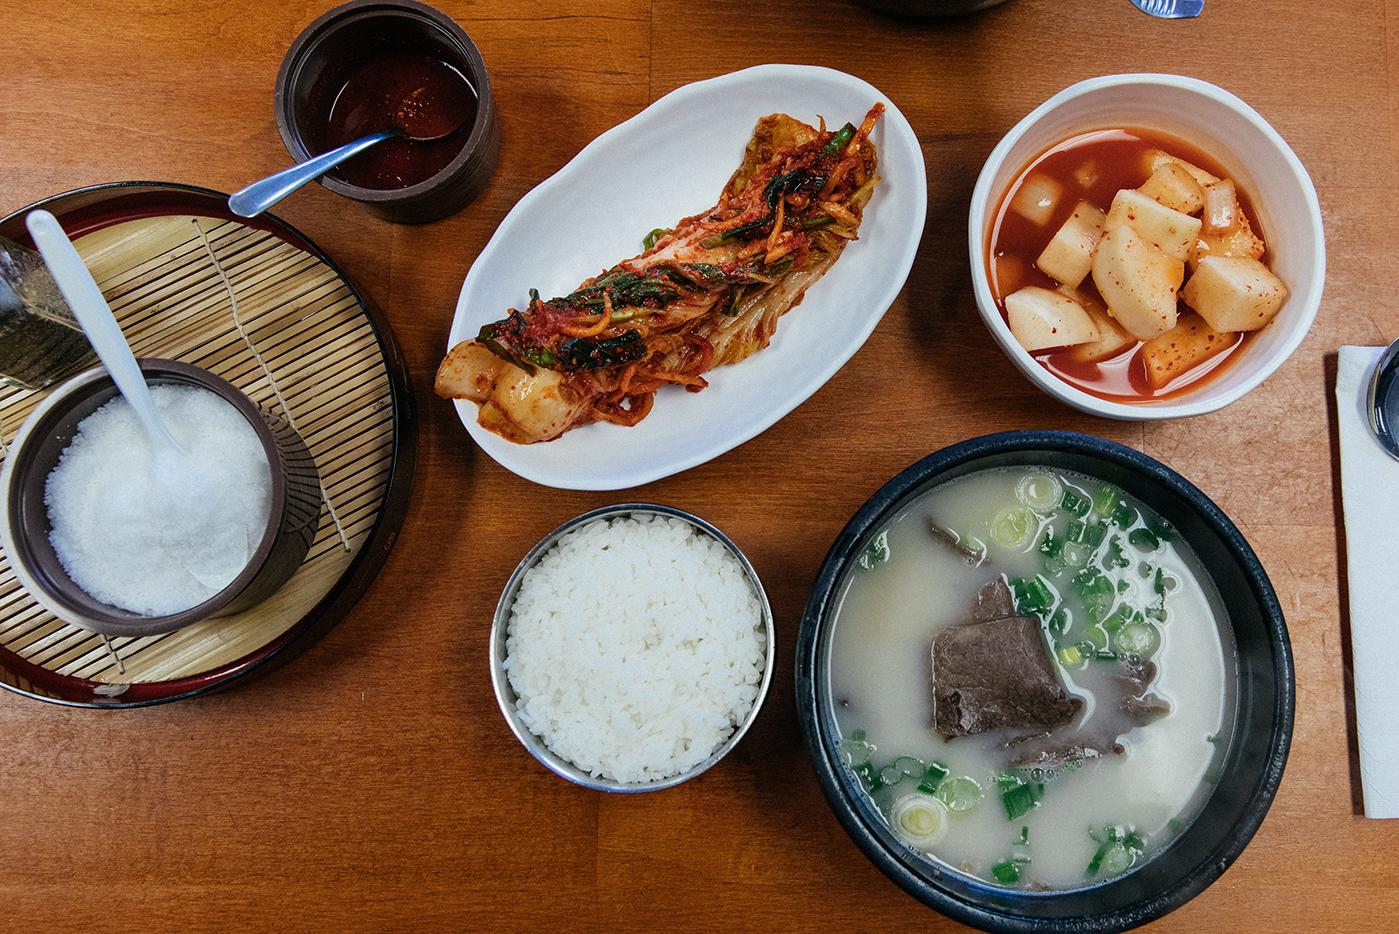 Seolleongtang with brisket and assorted garnishes at Chicago's Han Bat. Photo: Sandy Noto for WTTW